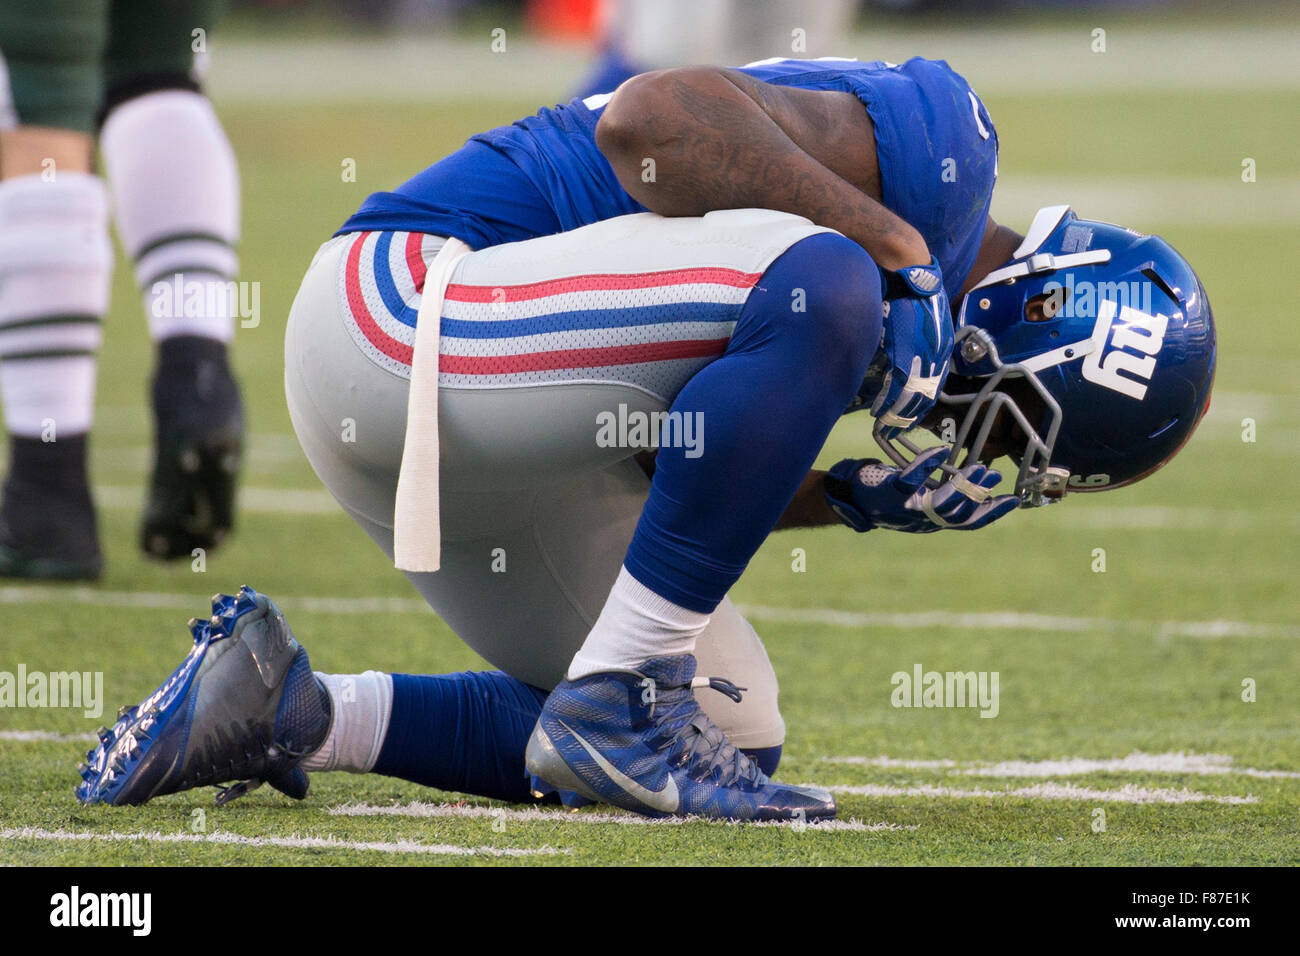 East Rutherford, New Jersey, USA. 6th Dec, 2015. New York Giants defensive end Robert Ayers (91) kneels on the field in pain during the NFL game between the New York Jets and the New York Giants at MetLife Stadium in East Rutherford, New Jersey. The New York Jets won 23-20. Christopher Szagola/CSM/Alamy Live News Stock Photo